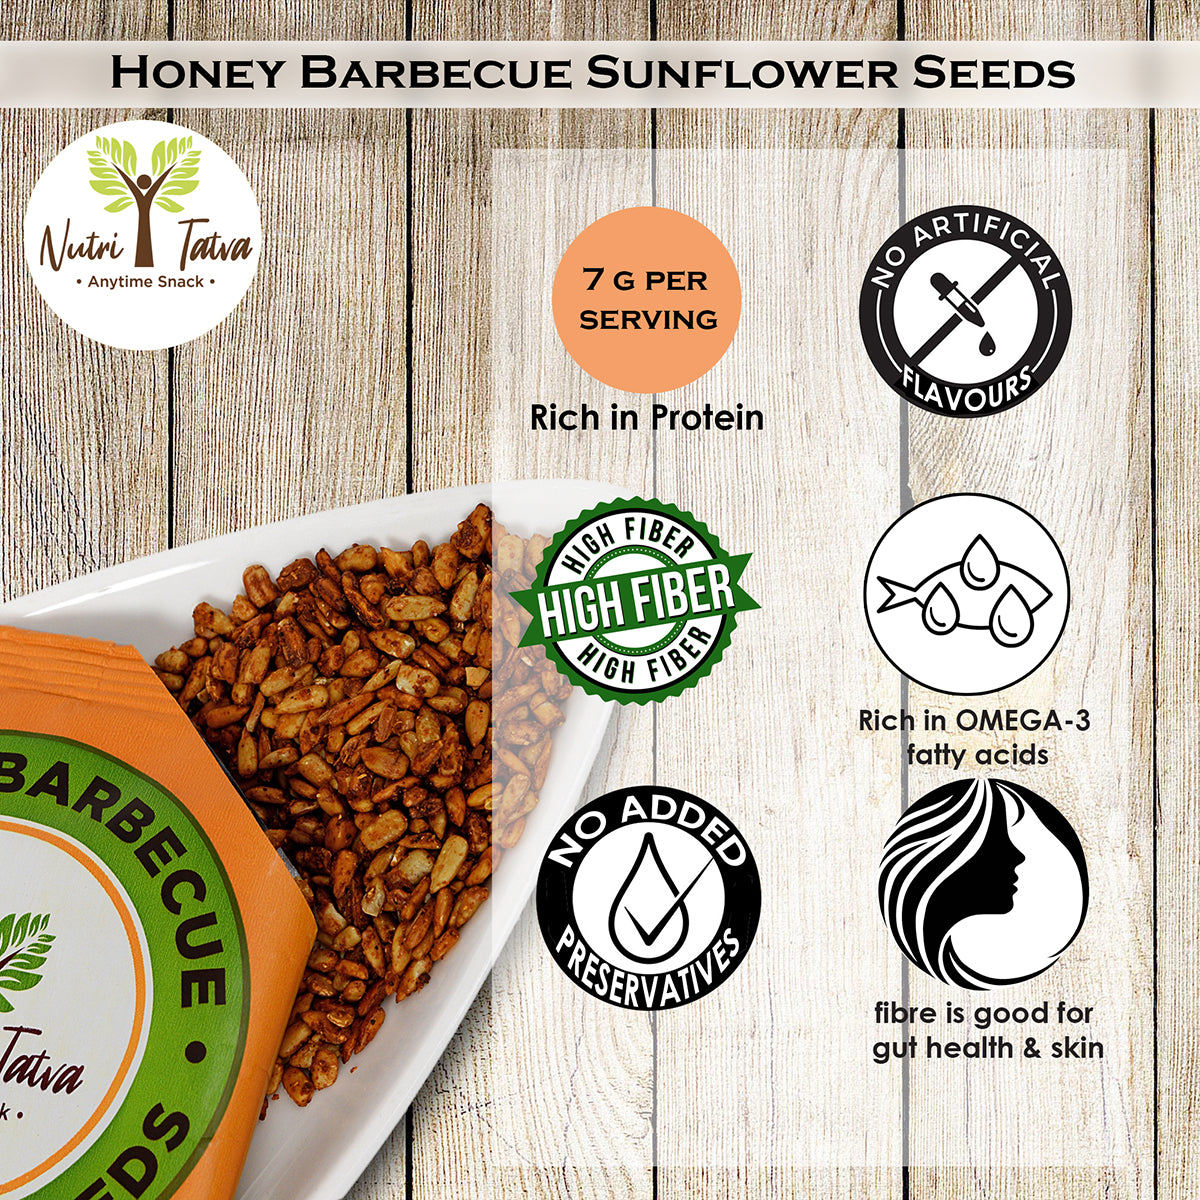 Honey Barbecue Sunflower Seeds, 30g, Crunchy Roasted Snack